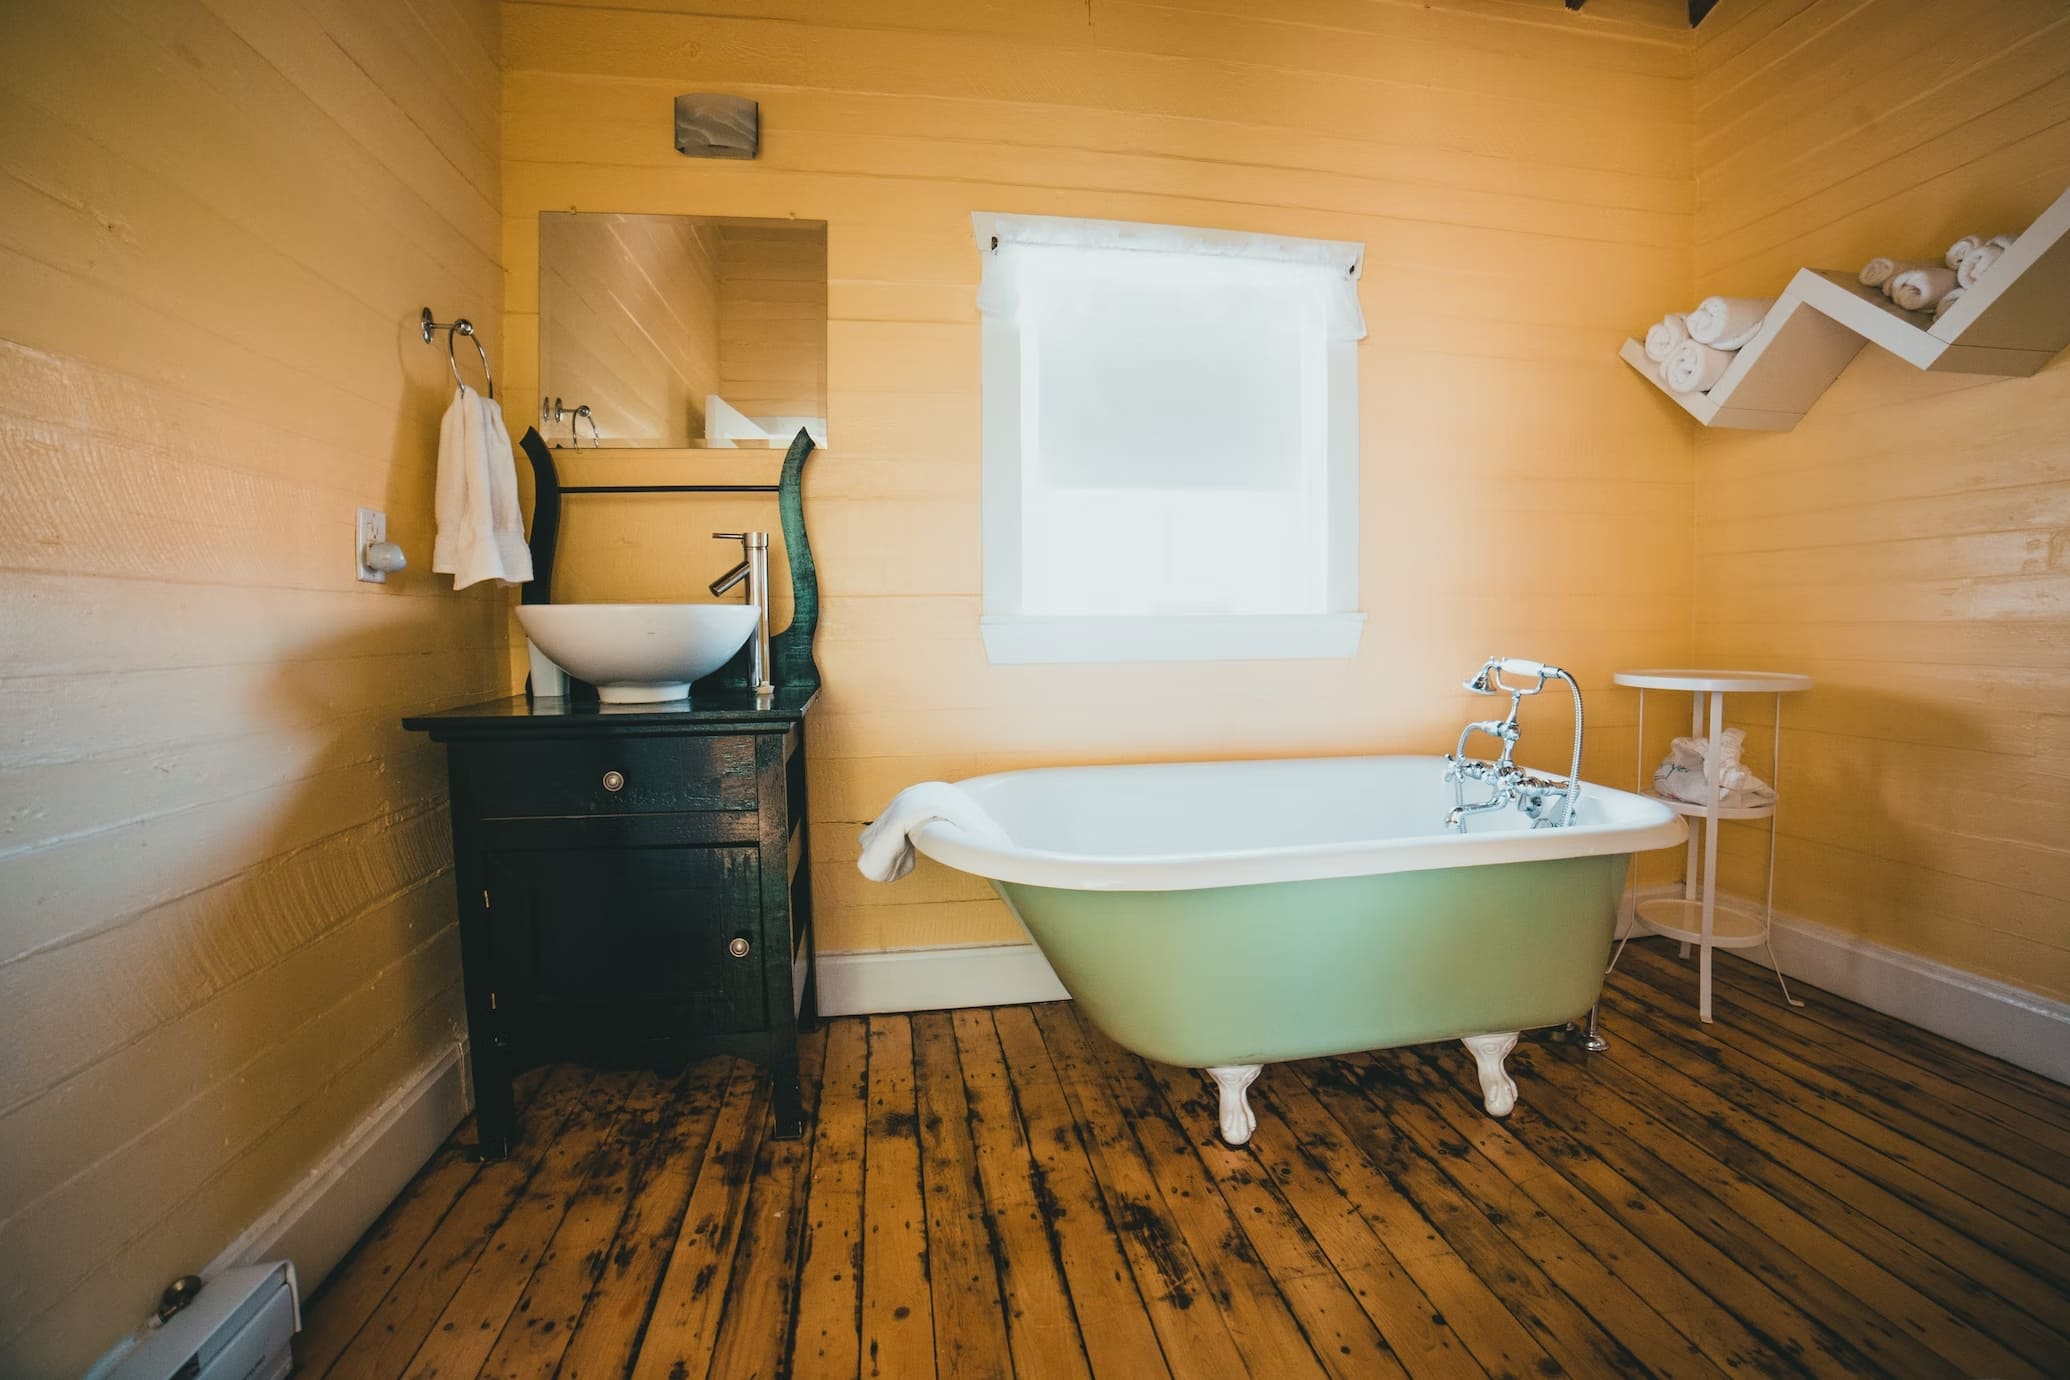 country style bathroom, with pastel colour bathtub, natural light through window, mirror